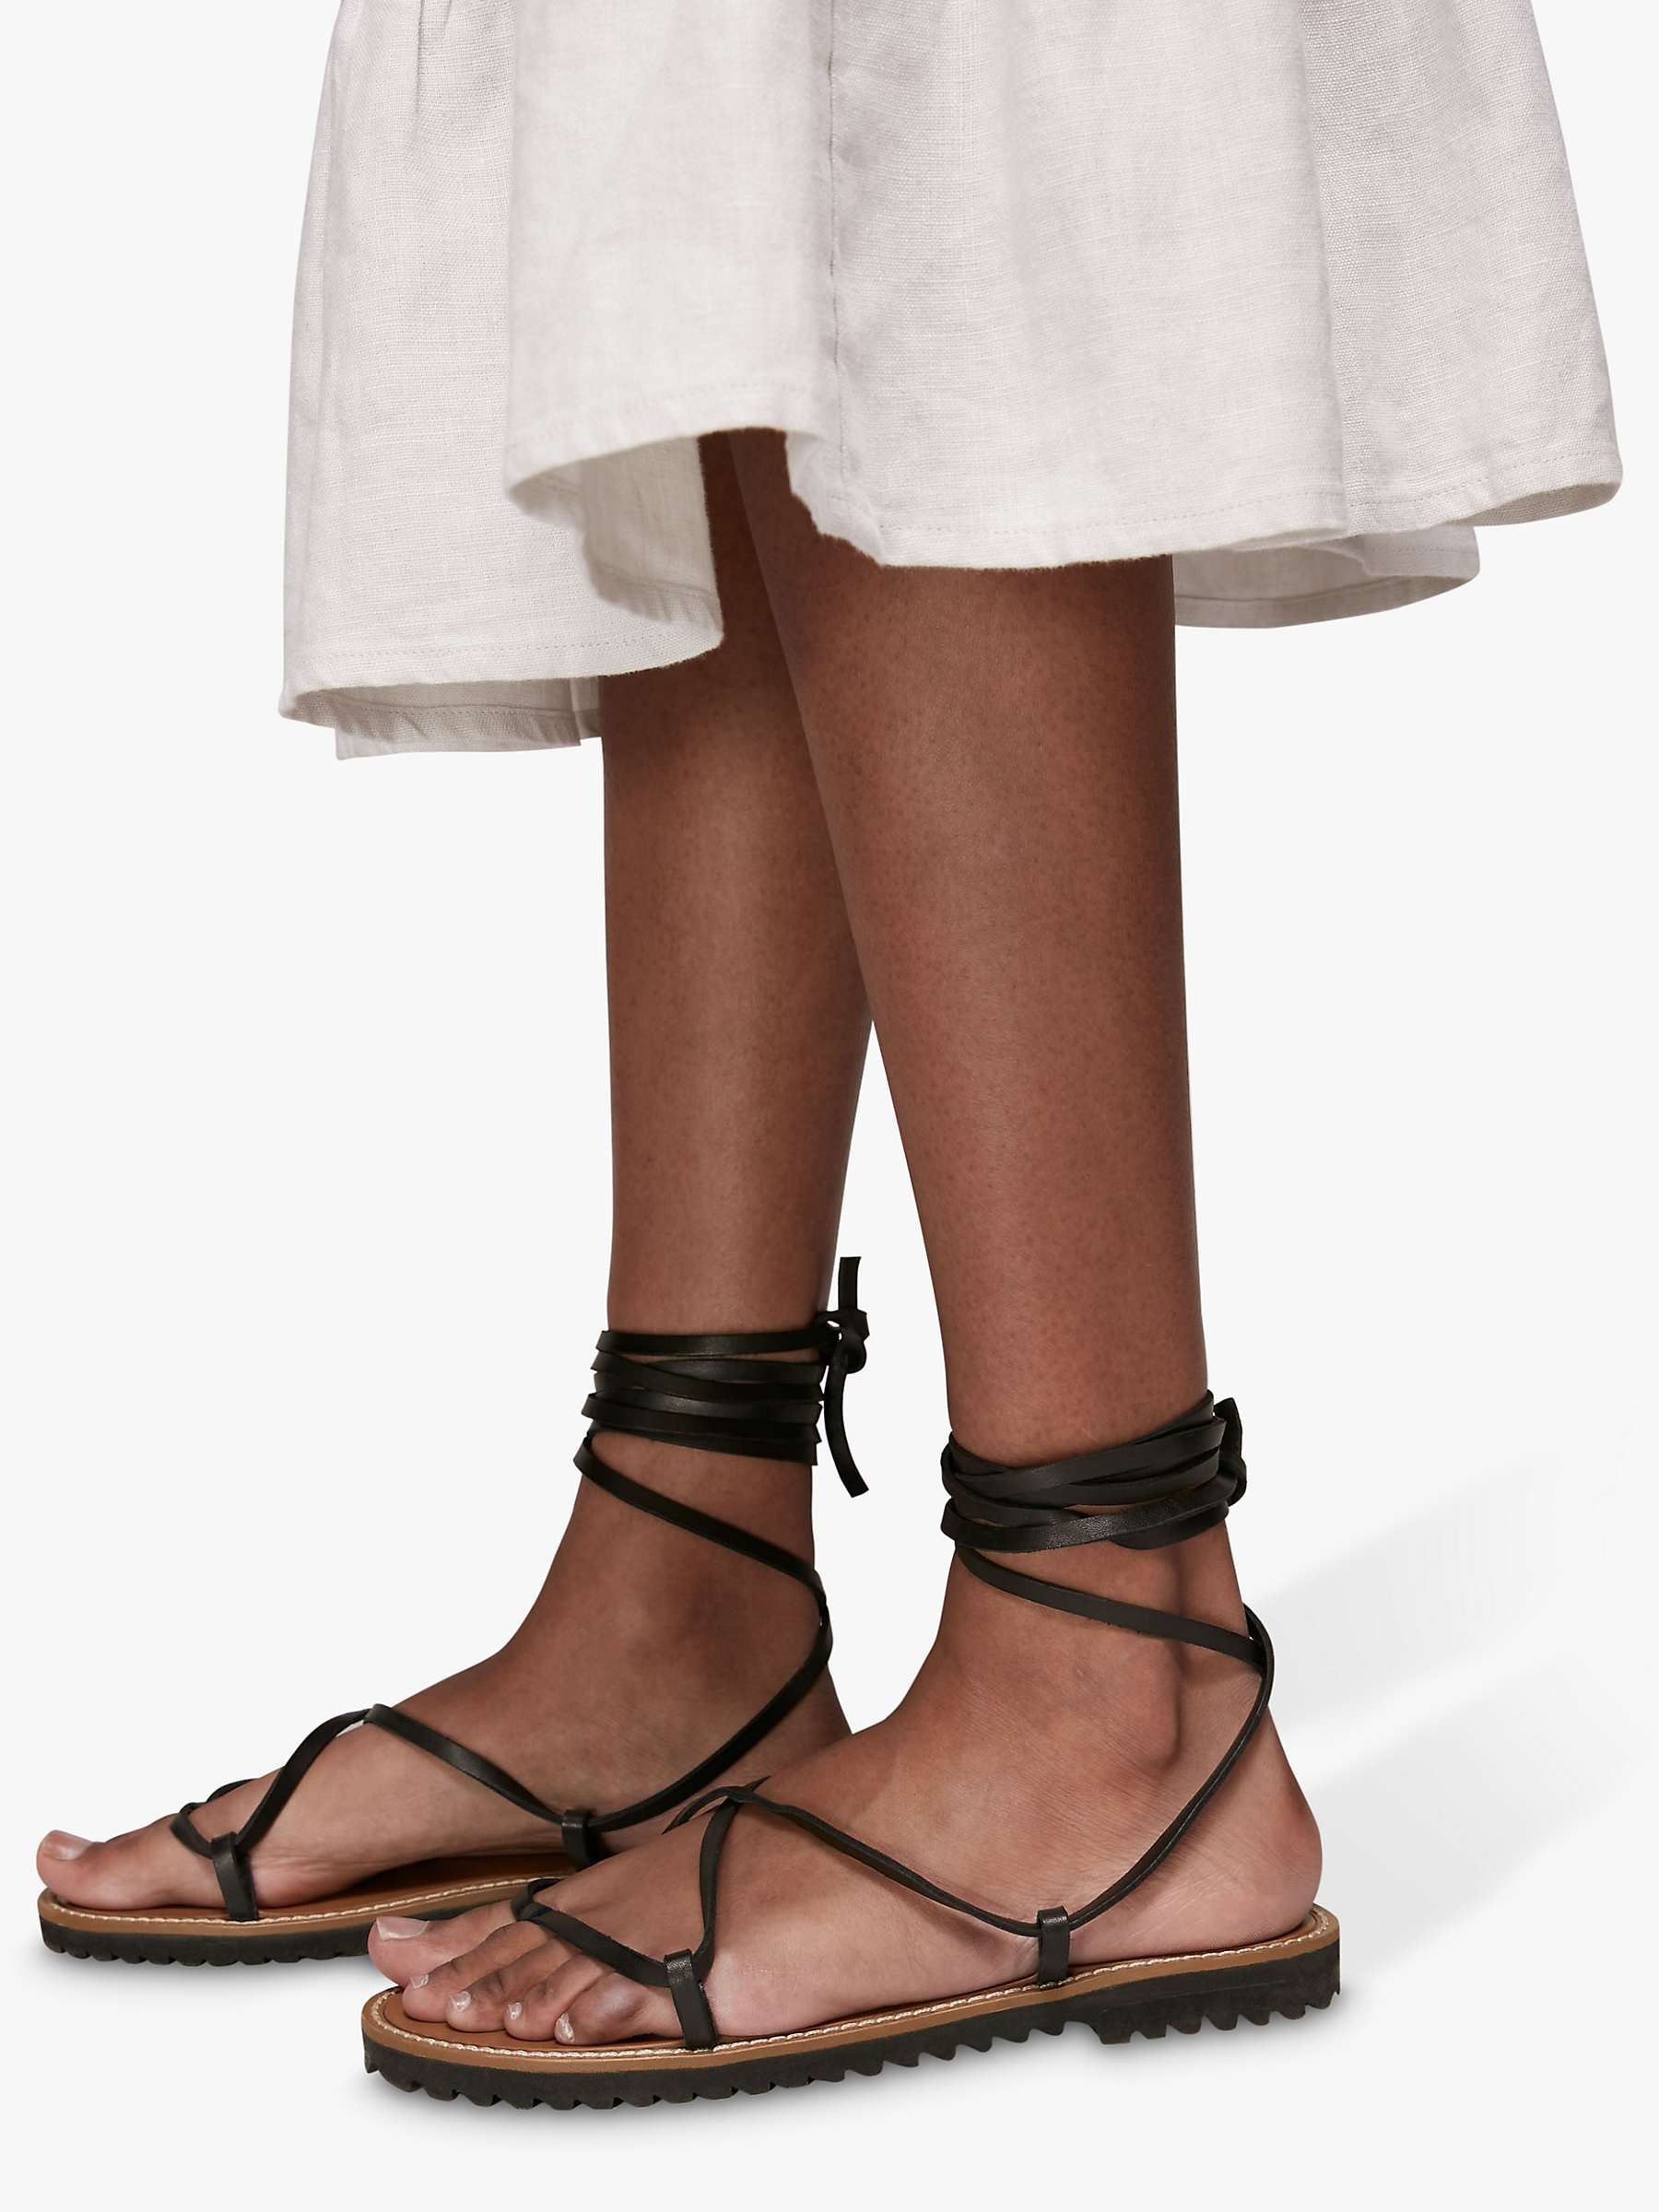 Buy Whistles Willow Leather Strappy Tie Sandals, Black Online at johnlewis.com